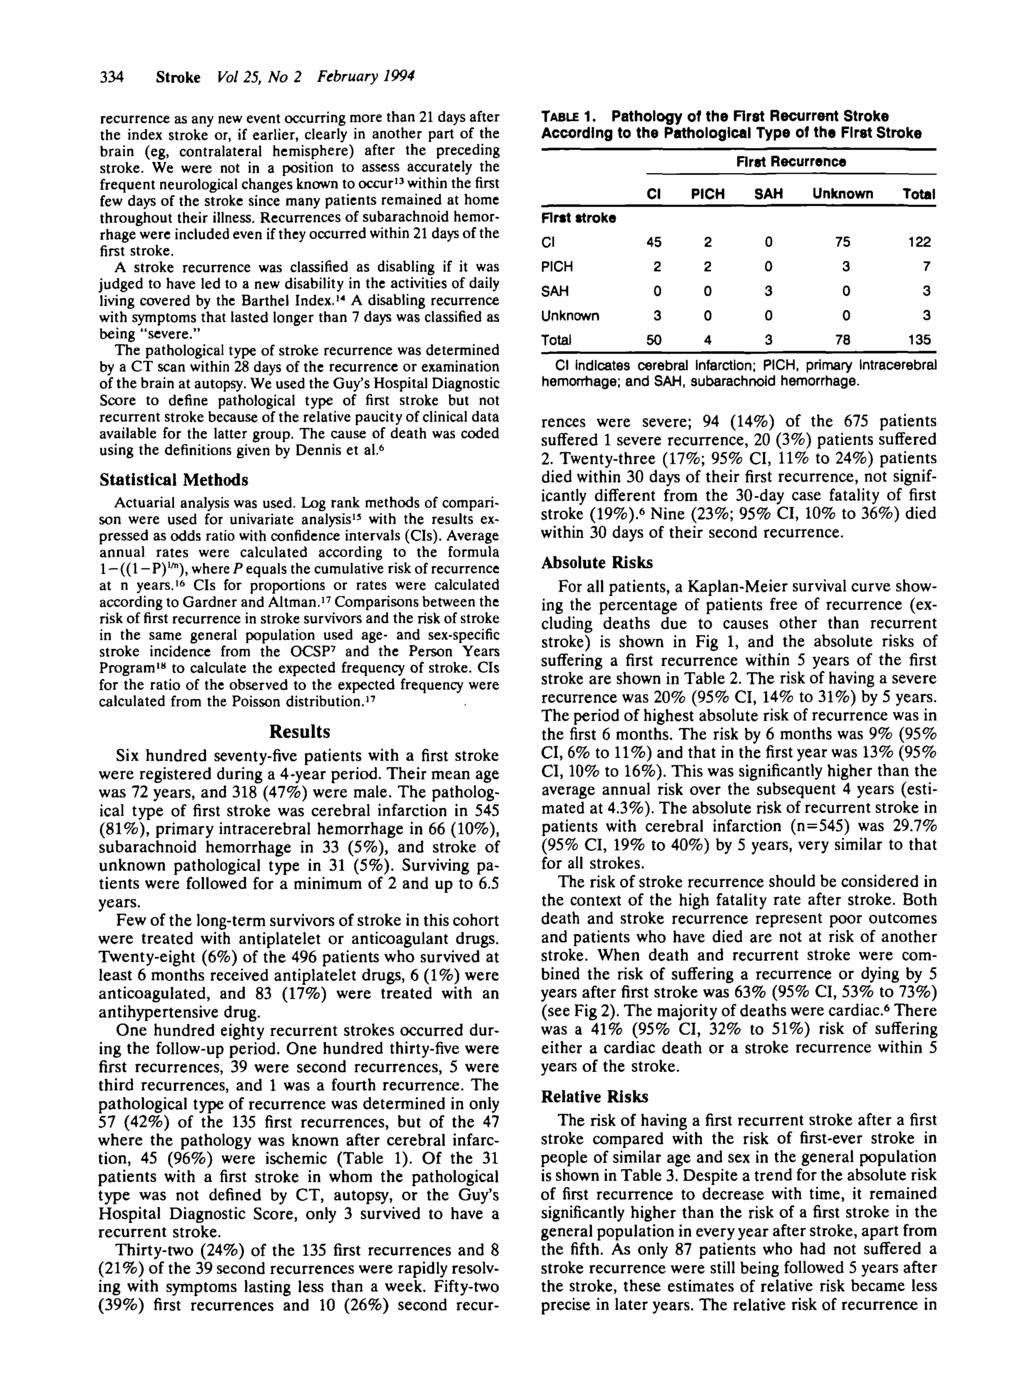 4 Stroke Vol 5, No February 1994 Downloaded from http://ahajournals.